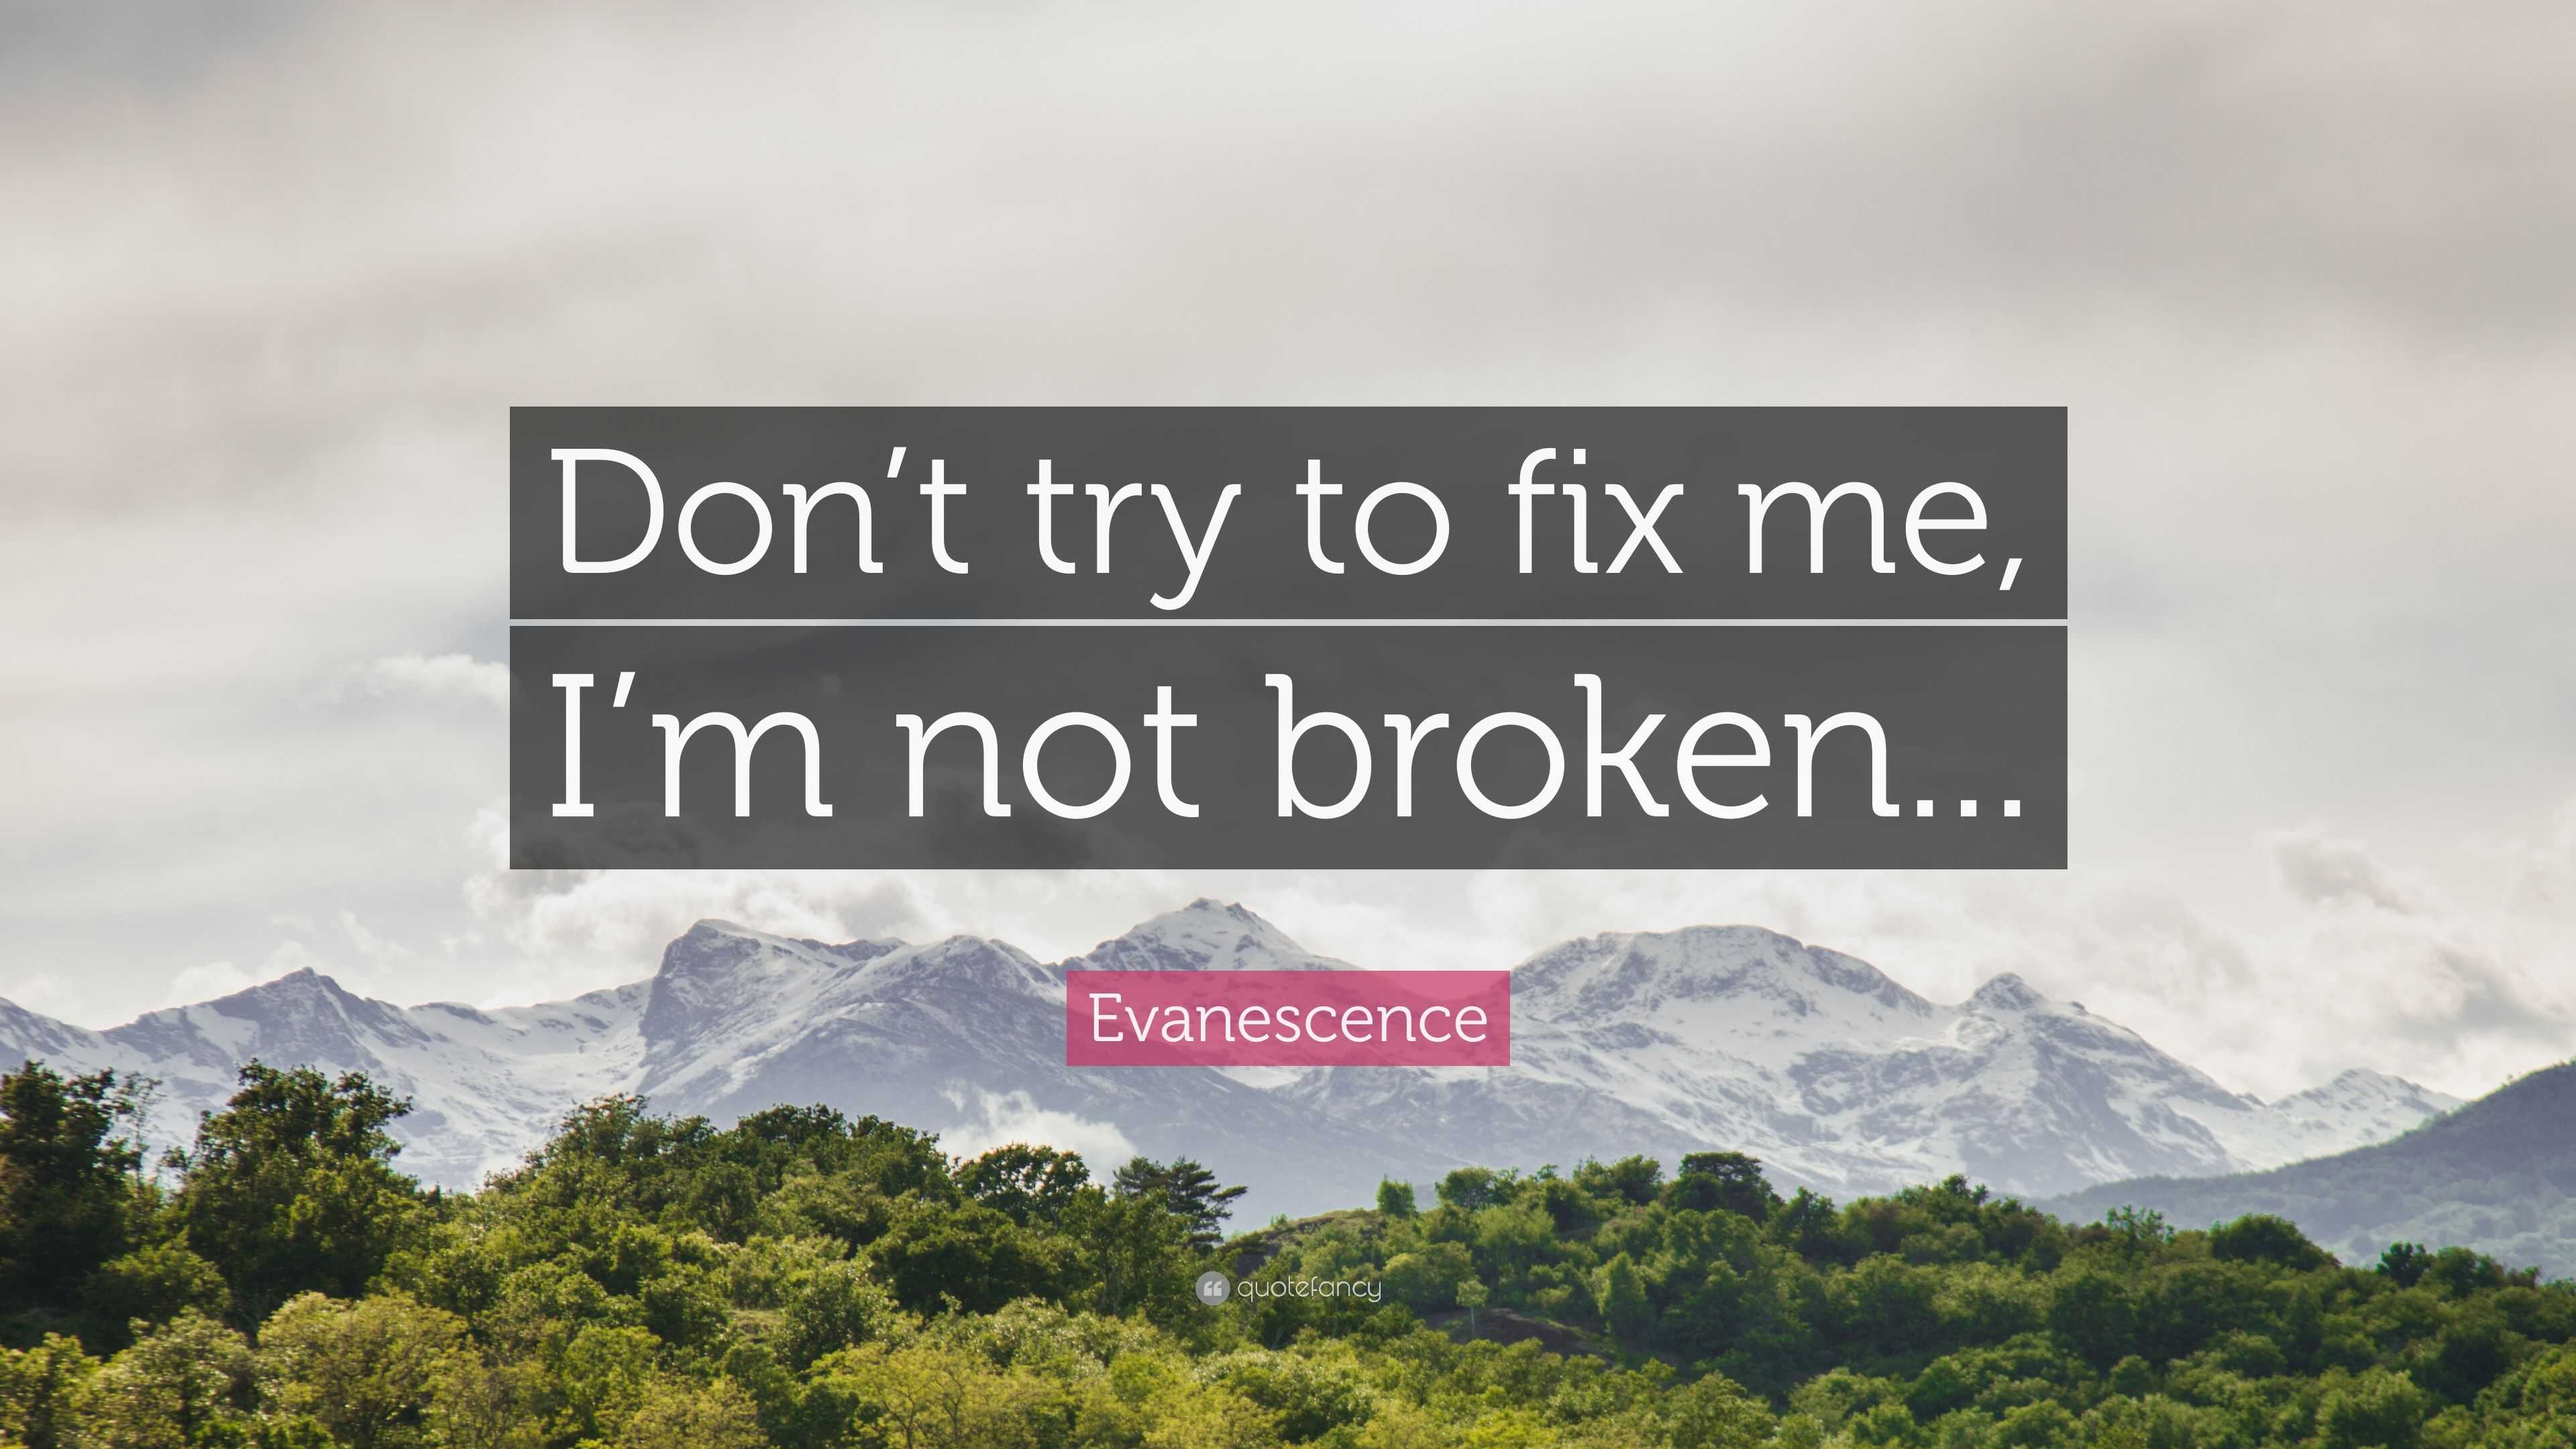 Evanescence Quote: “Don't try to fix me, I'm not broken...”